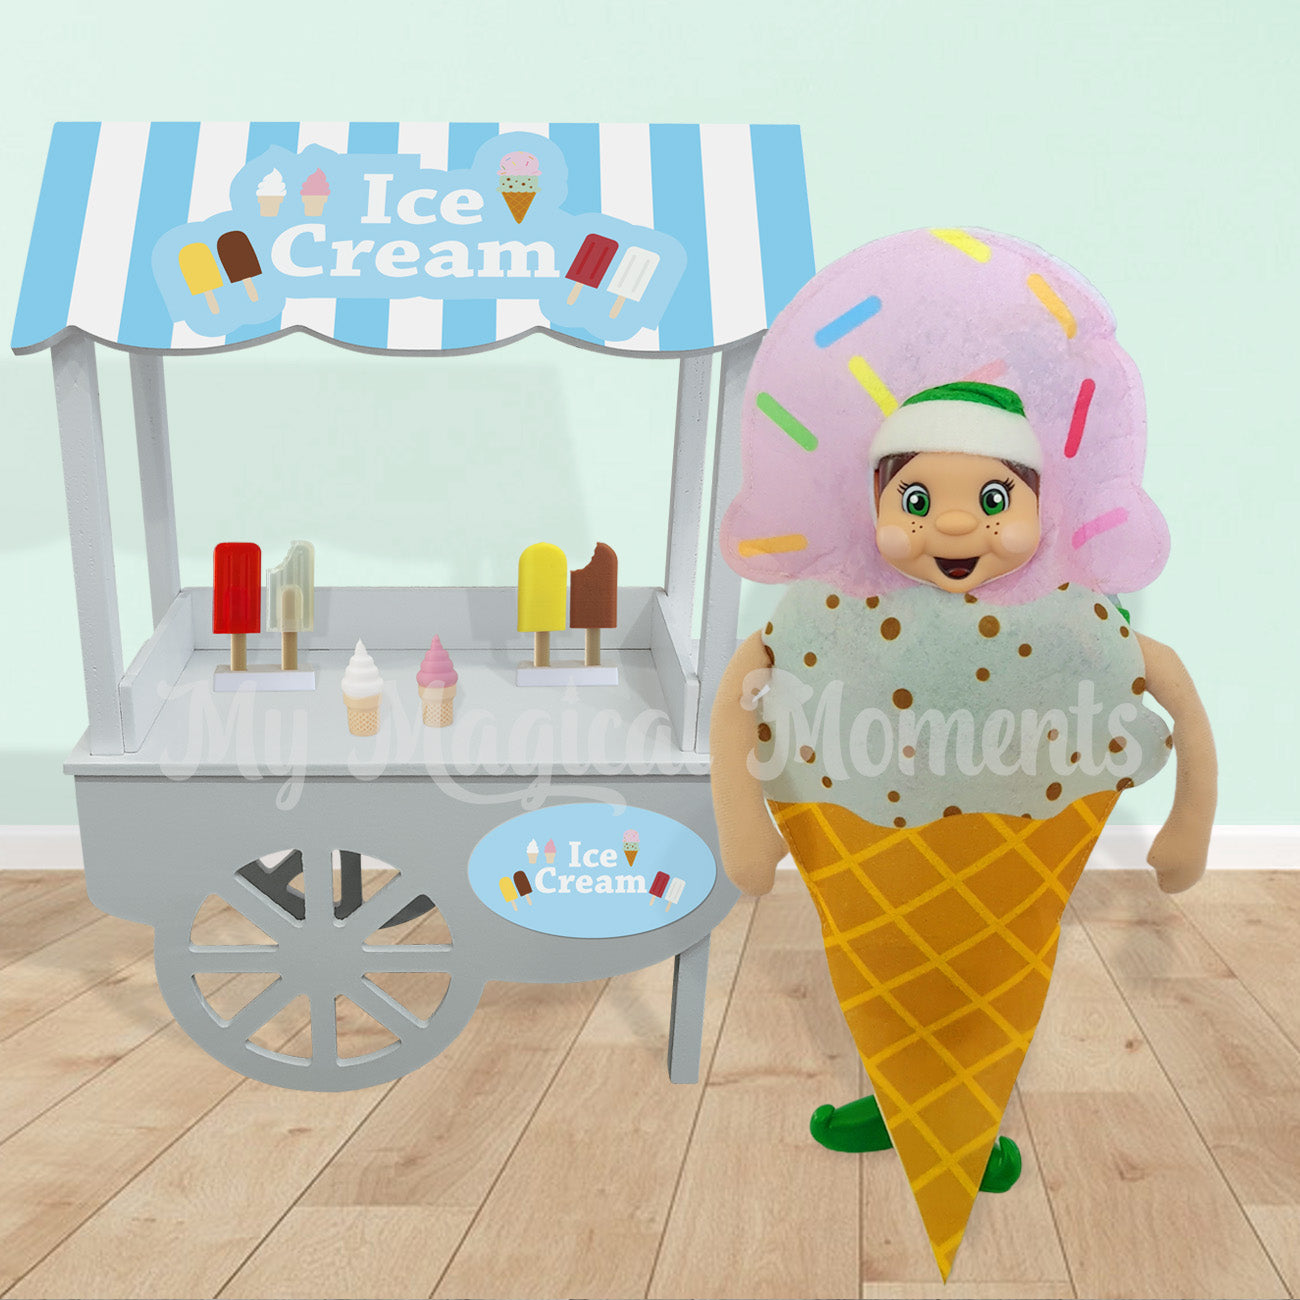 Elf dressed as an ice cream selling paddle pops